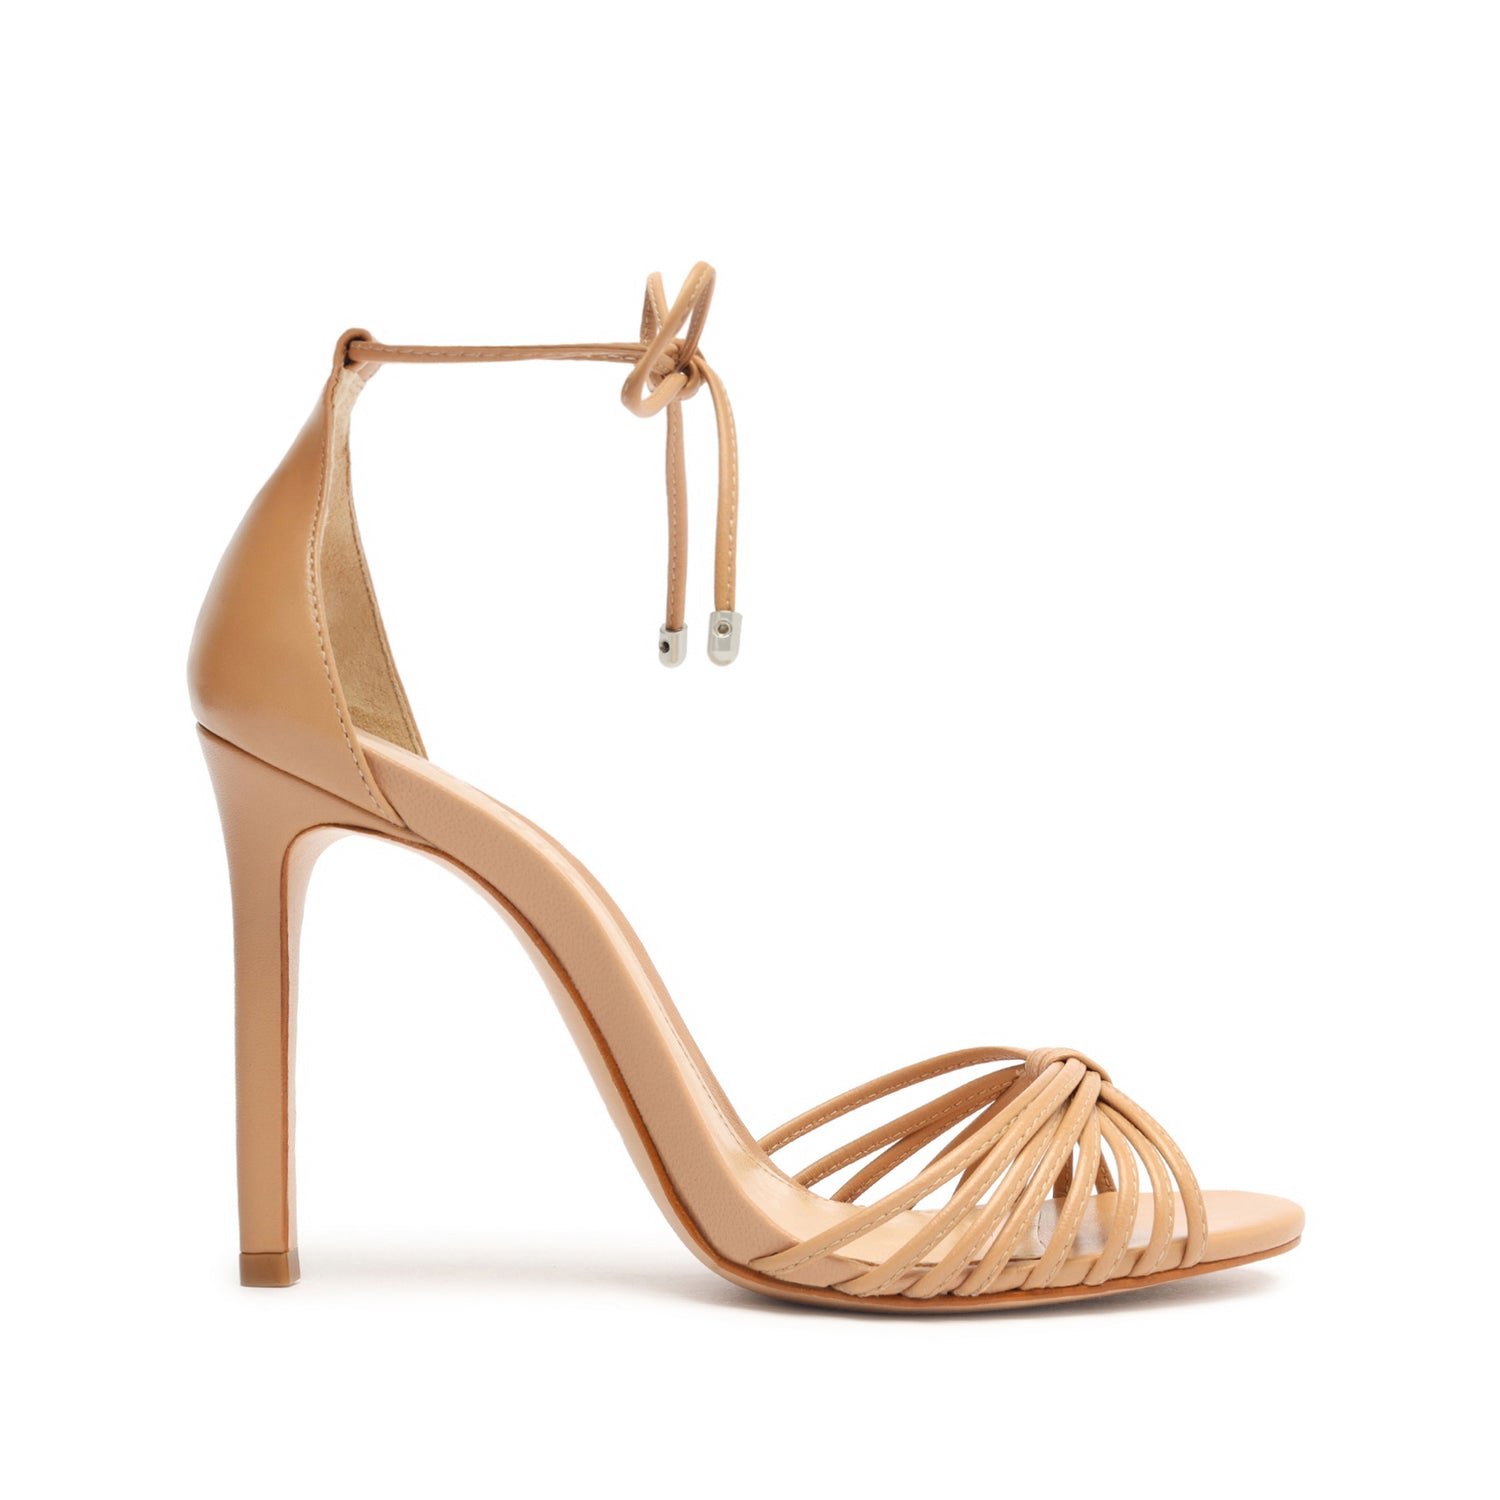 Dive Nappa Leather Sandal Sandals Pre Fall 22 5 Honey Beige Nappa Leather - Schutz Shoes